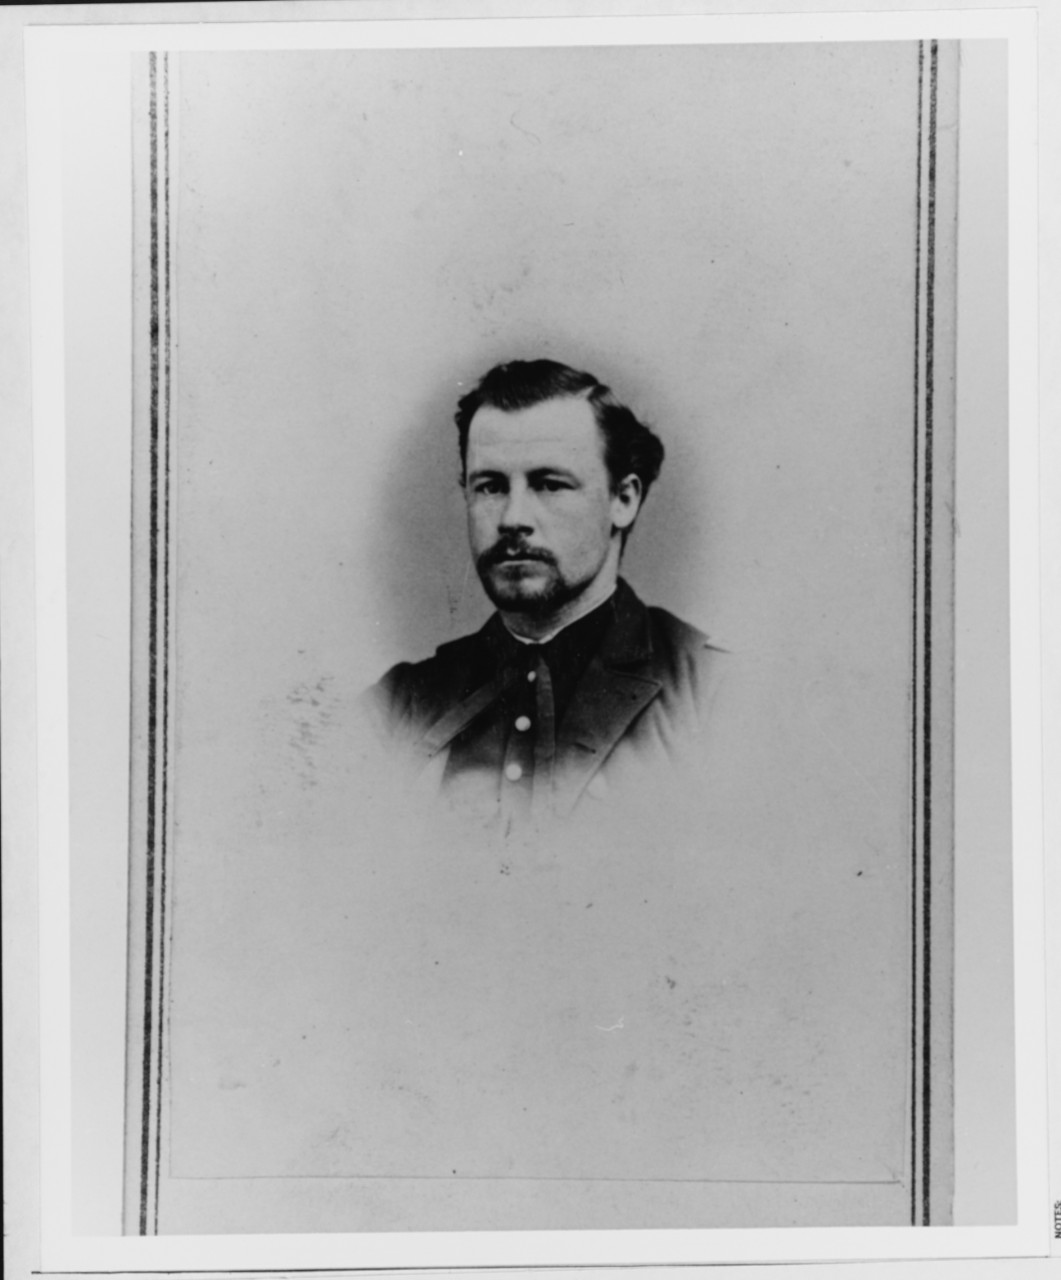 Acting Ensign James H. Barry